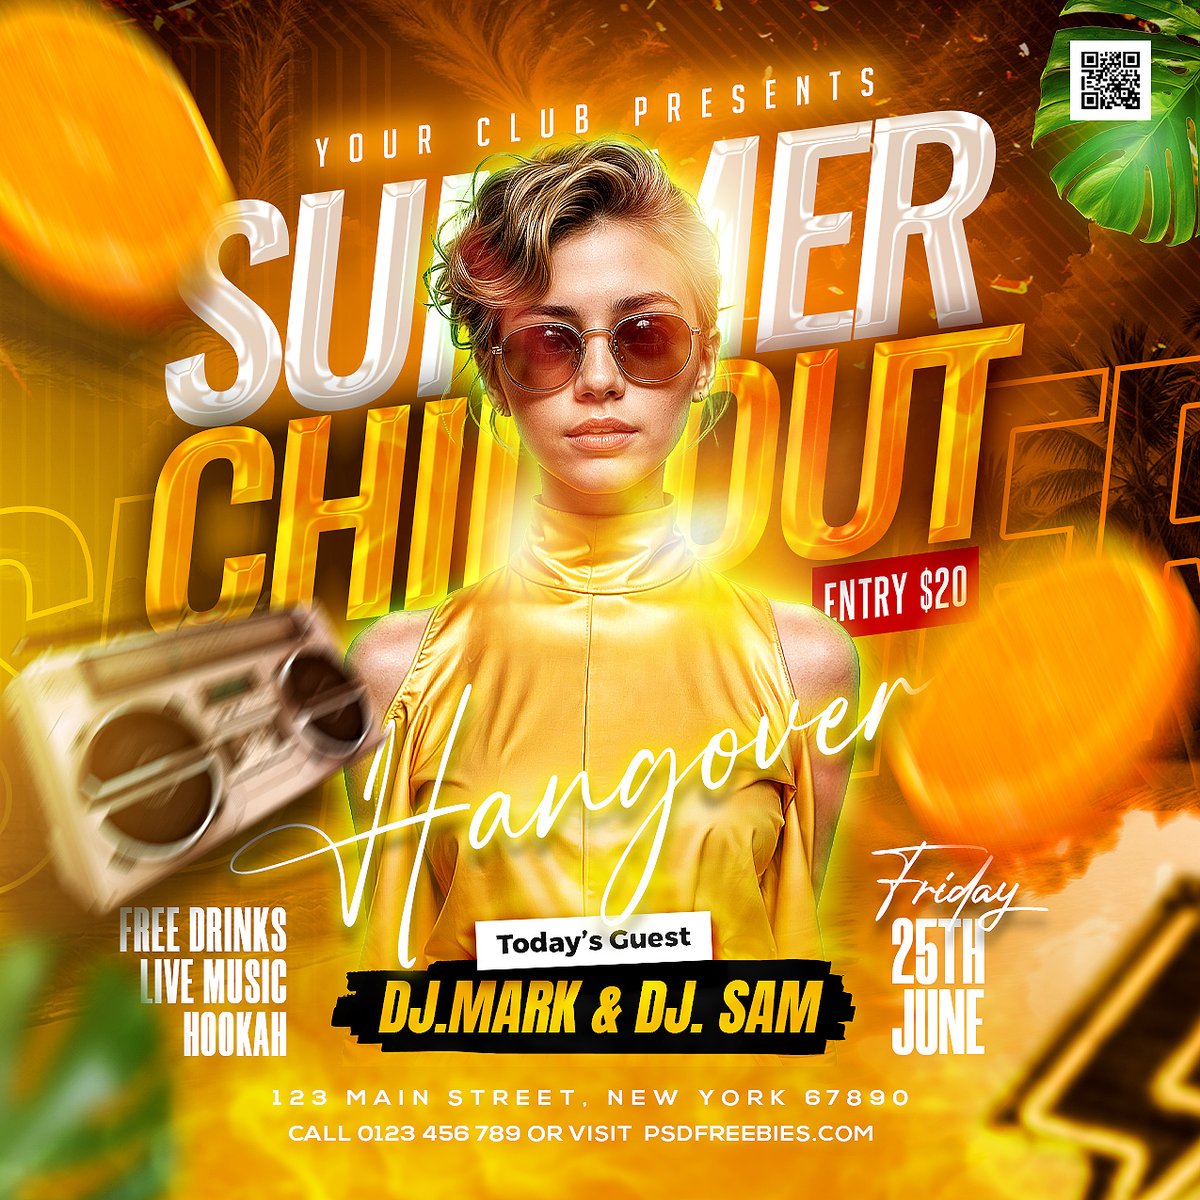 Free Summer Chillout DJ Event Instagram Post PSD
Download Link >> psdfreebies.com/psd/summer-chi…

#freepsd #psd #photoshop #socialmedia #summerparty #Instagrampost #partypost #freetemplate #beachparty  #rockmusic #weekendparty